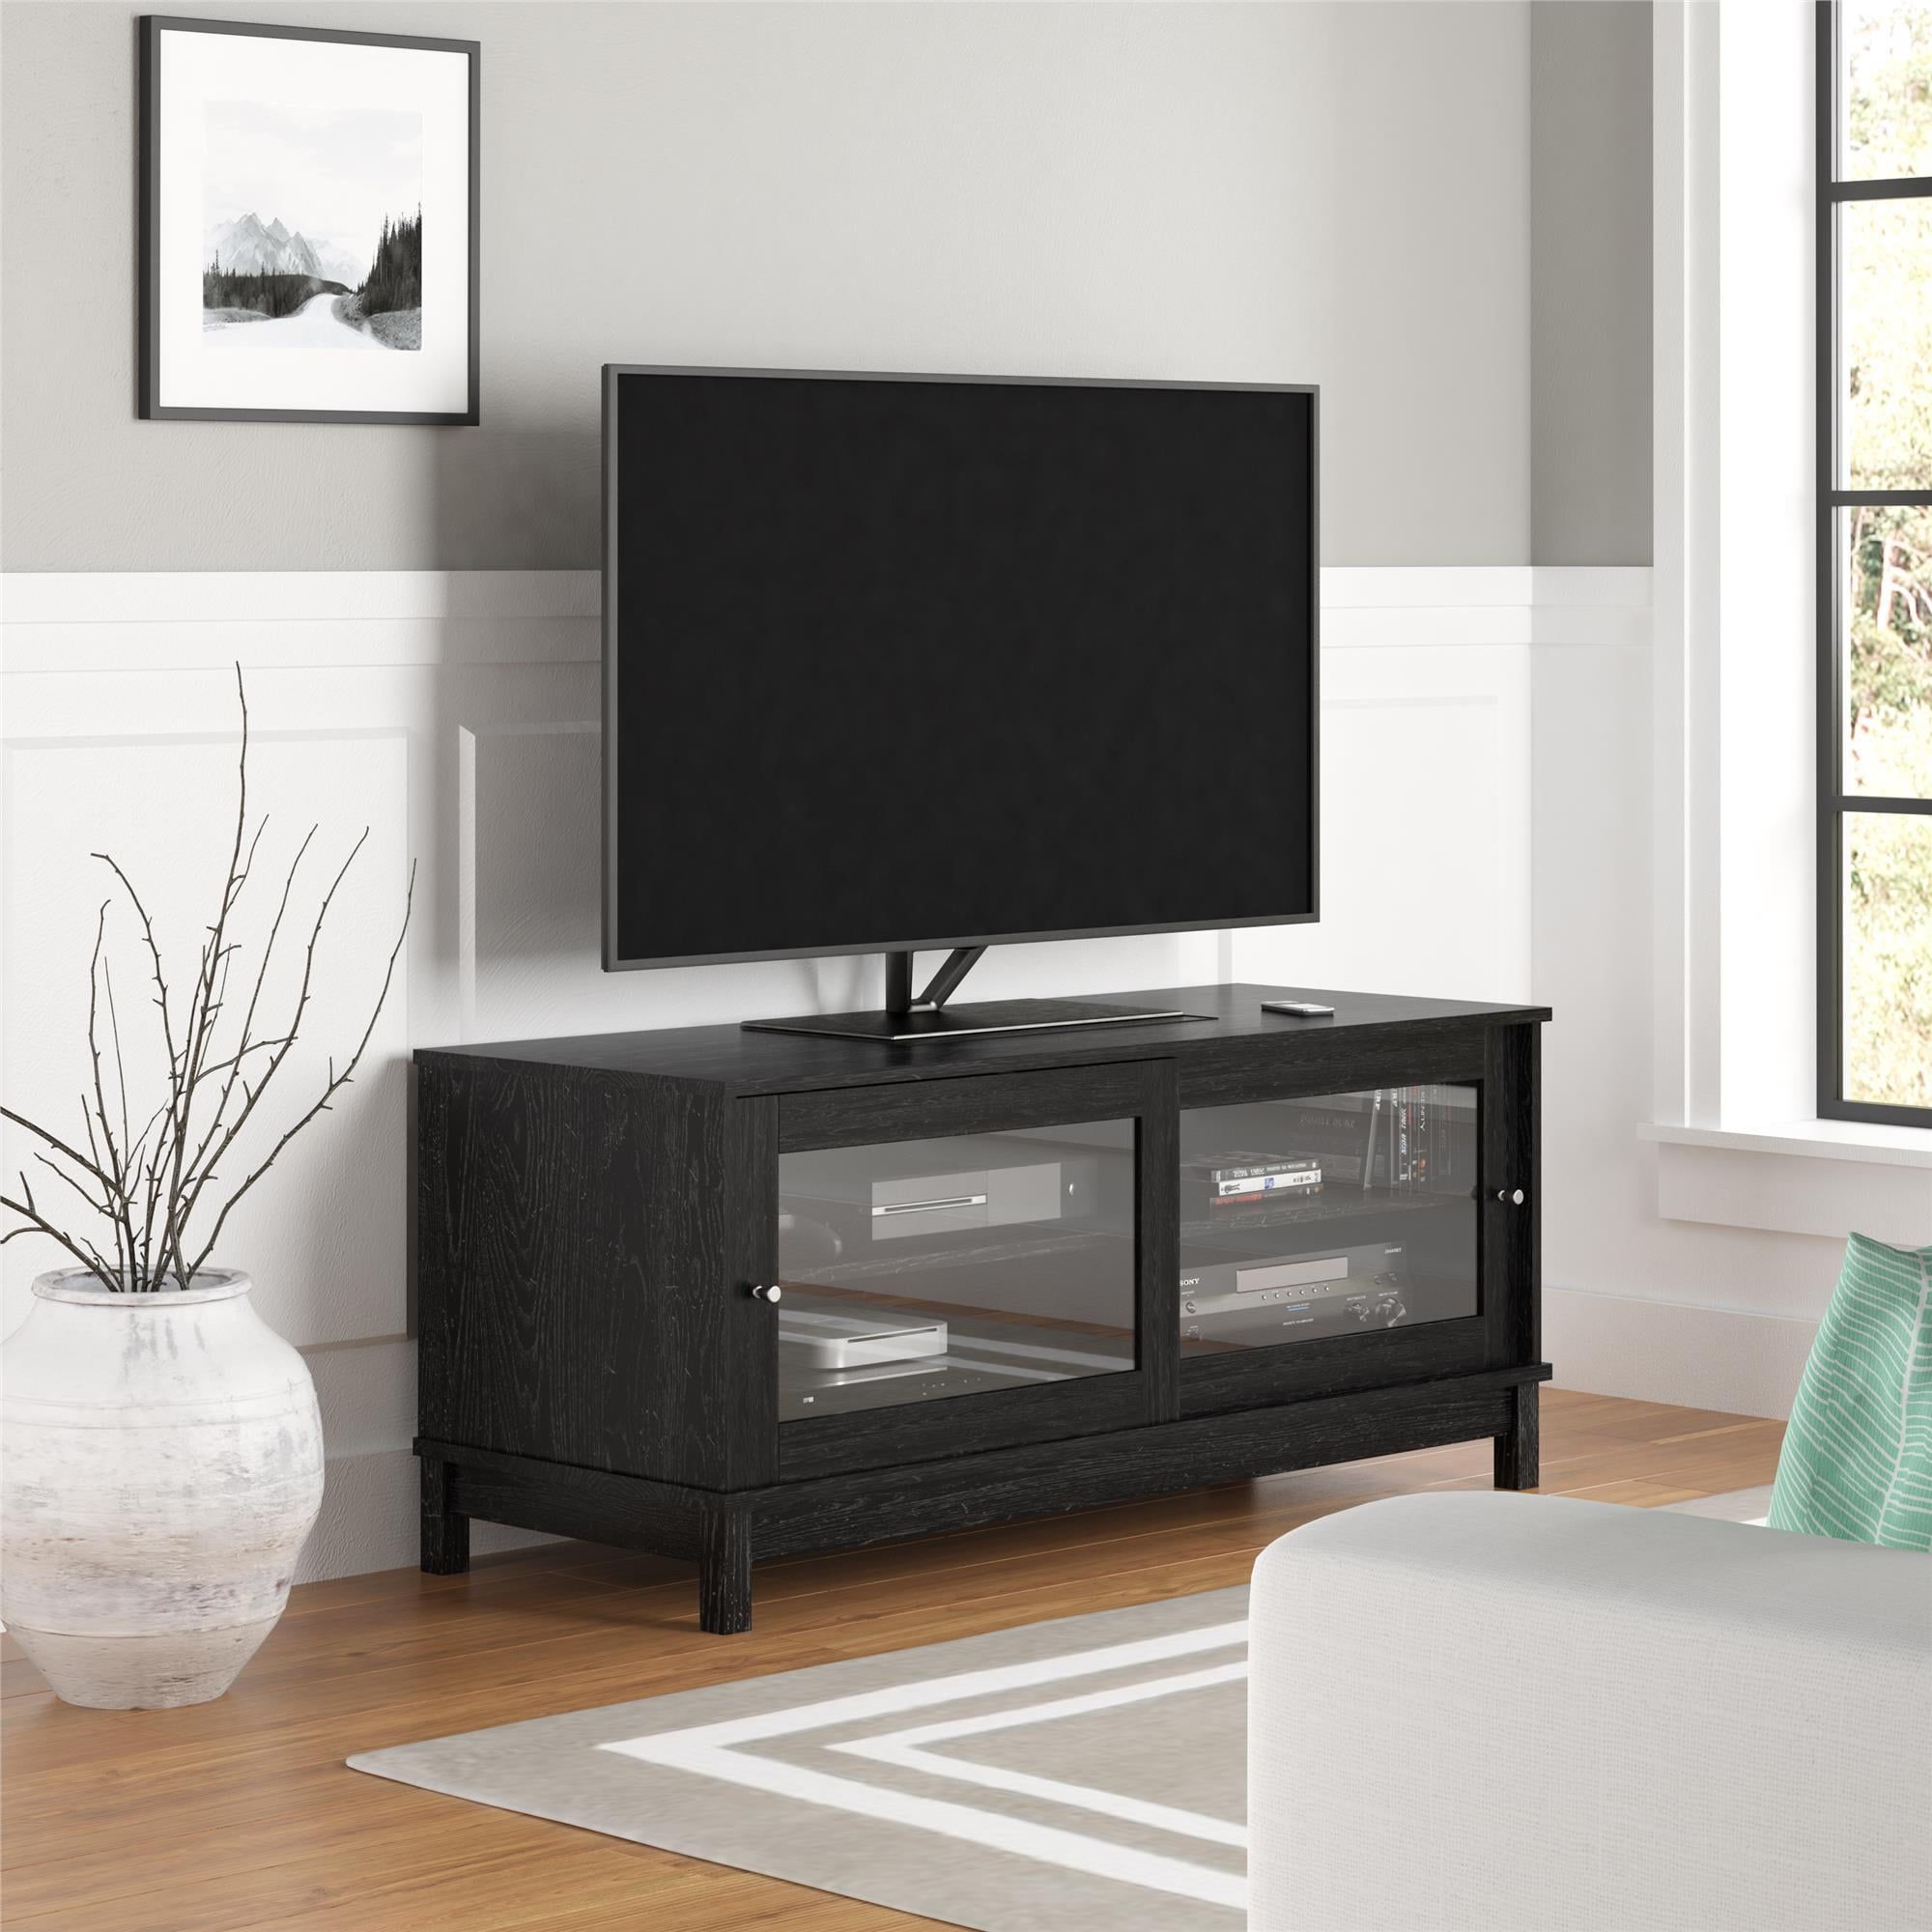 Mainstays Tv Stand For Tvs Up To 55", Multiple Finishes – Black Inside Tv Stands With 2 Doors And 2 Open Shelves (View 19 of 20)